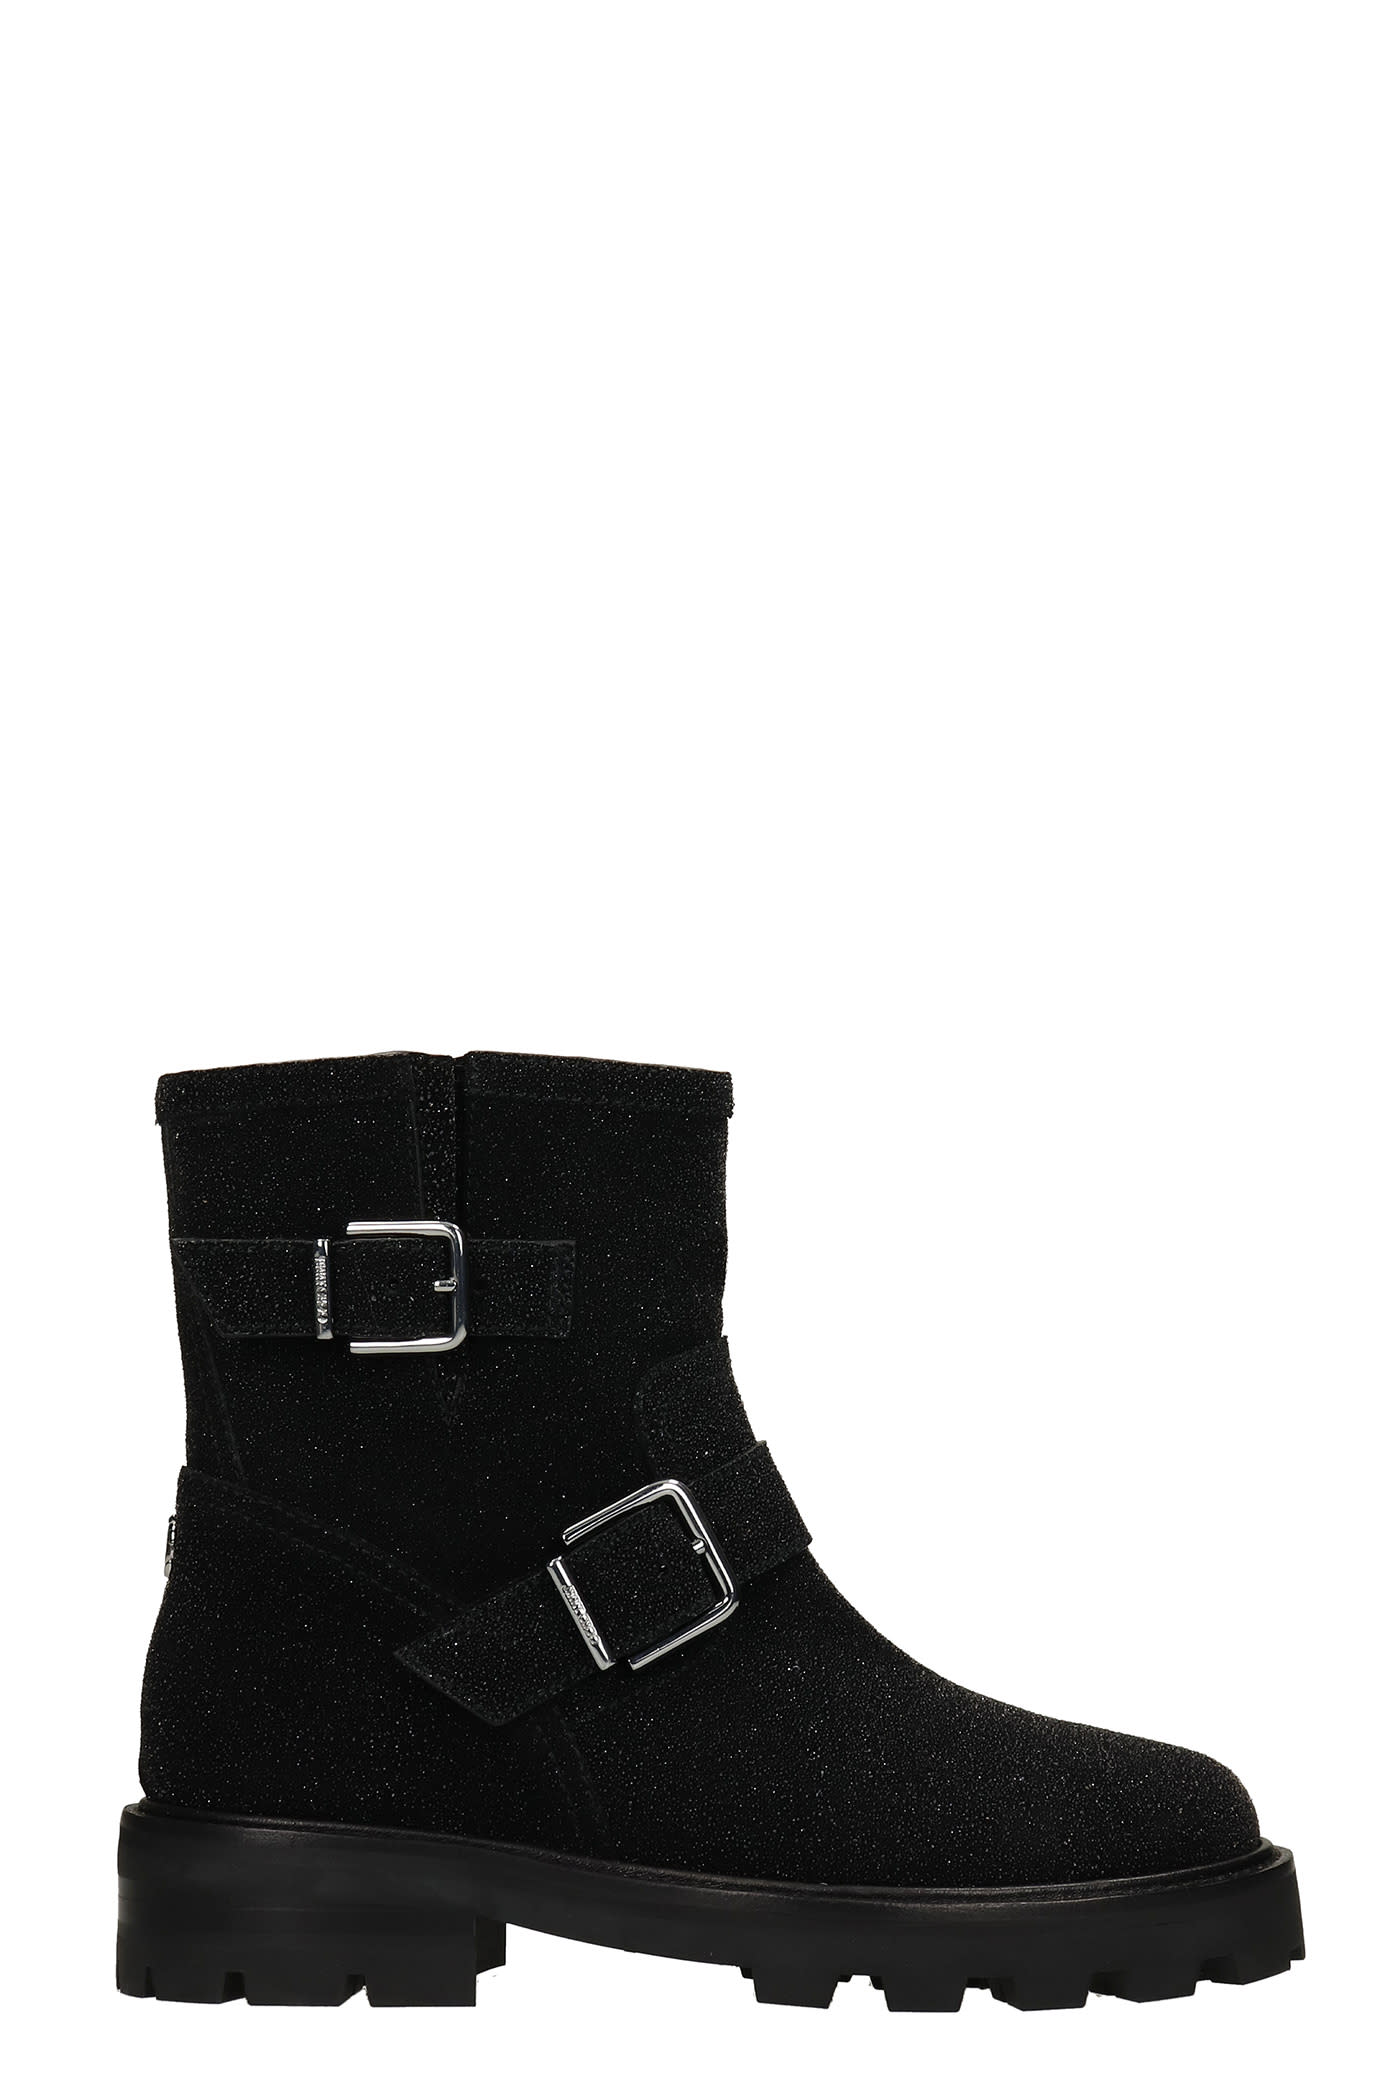 Jimmy Choo Youth Ii Combat Boots In Black Leather